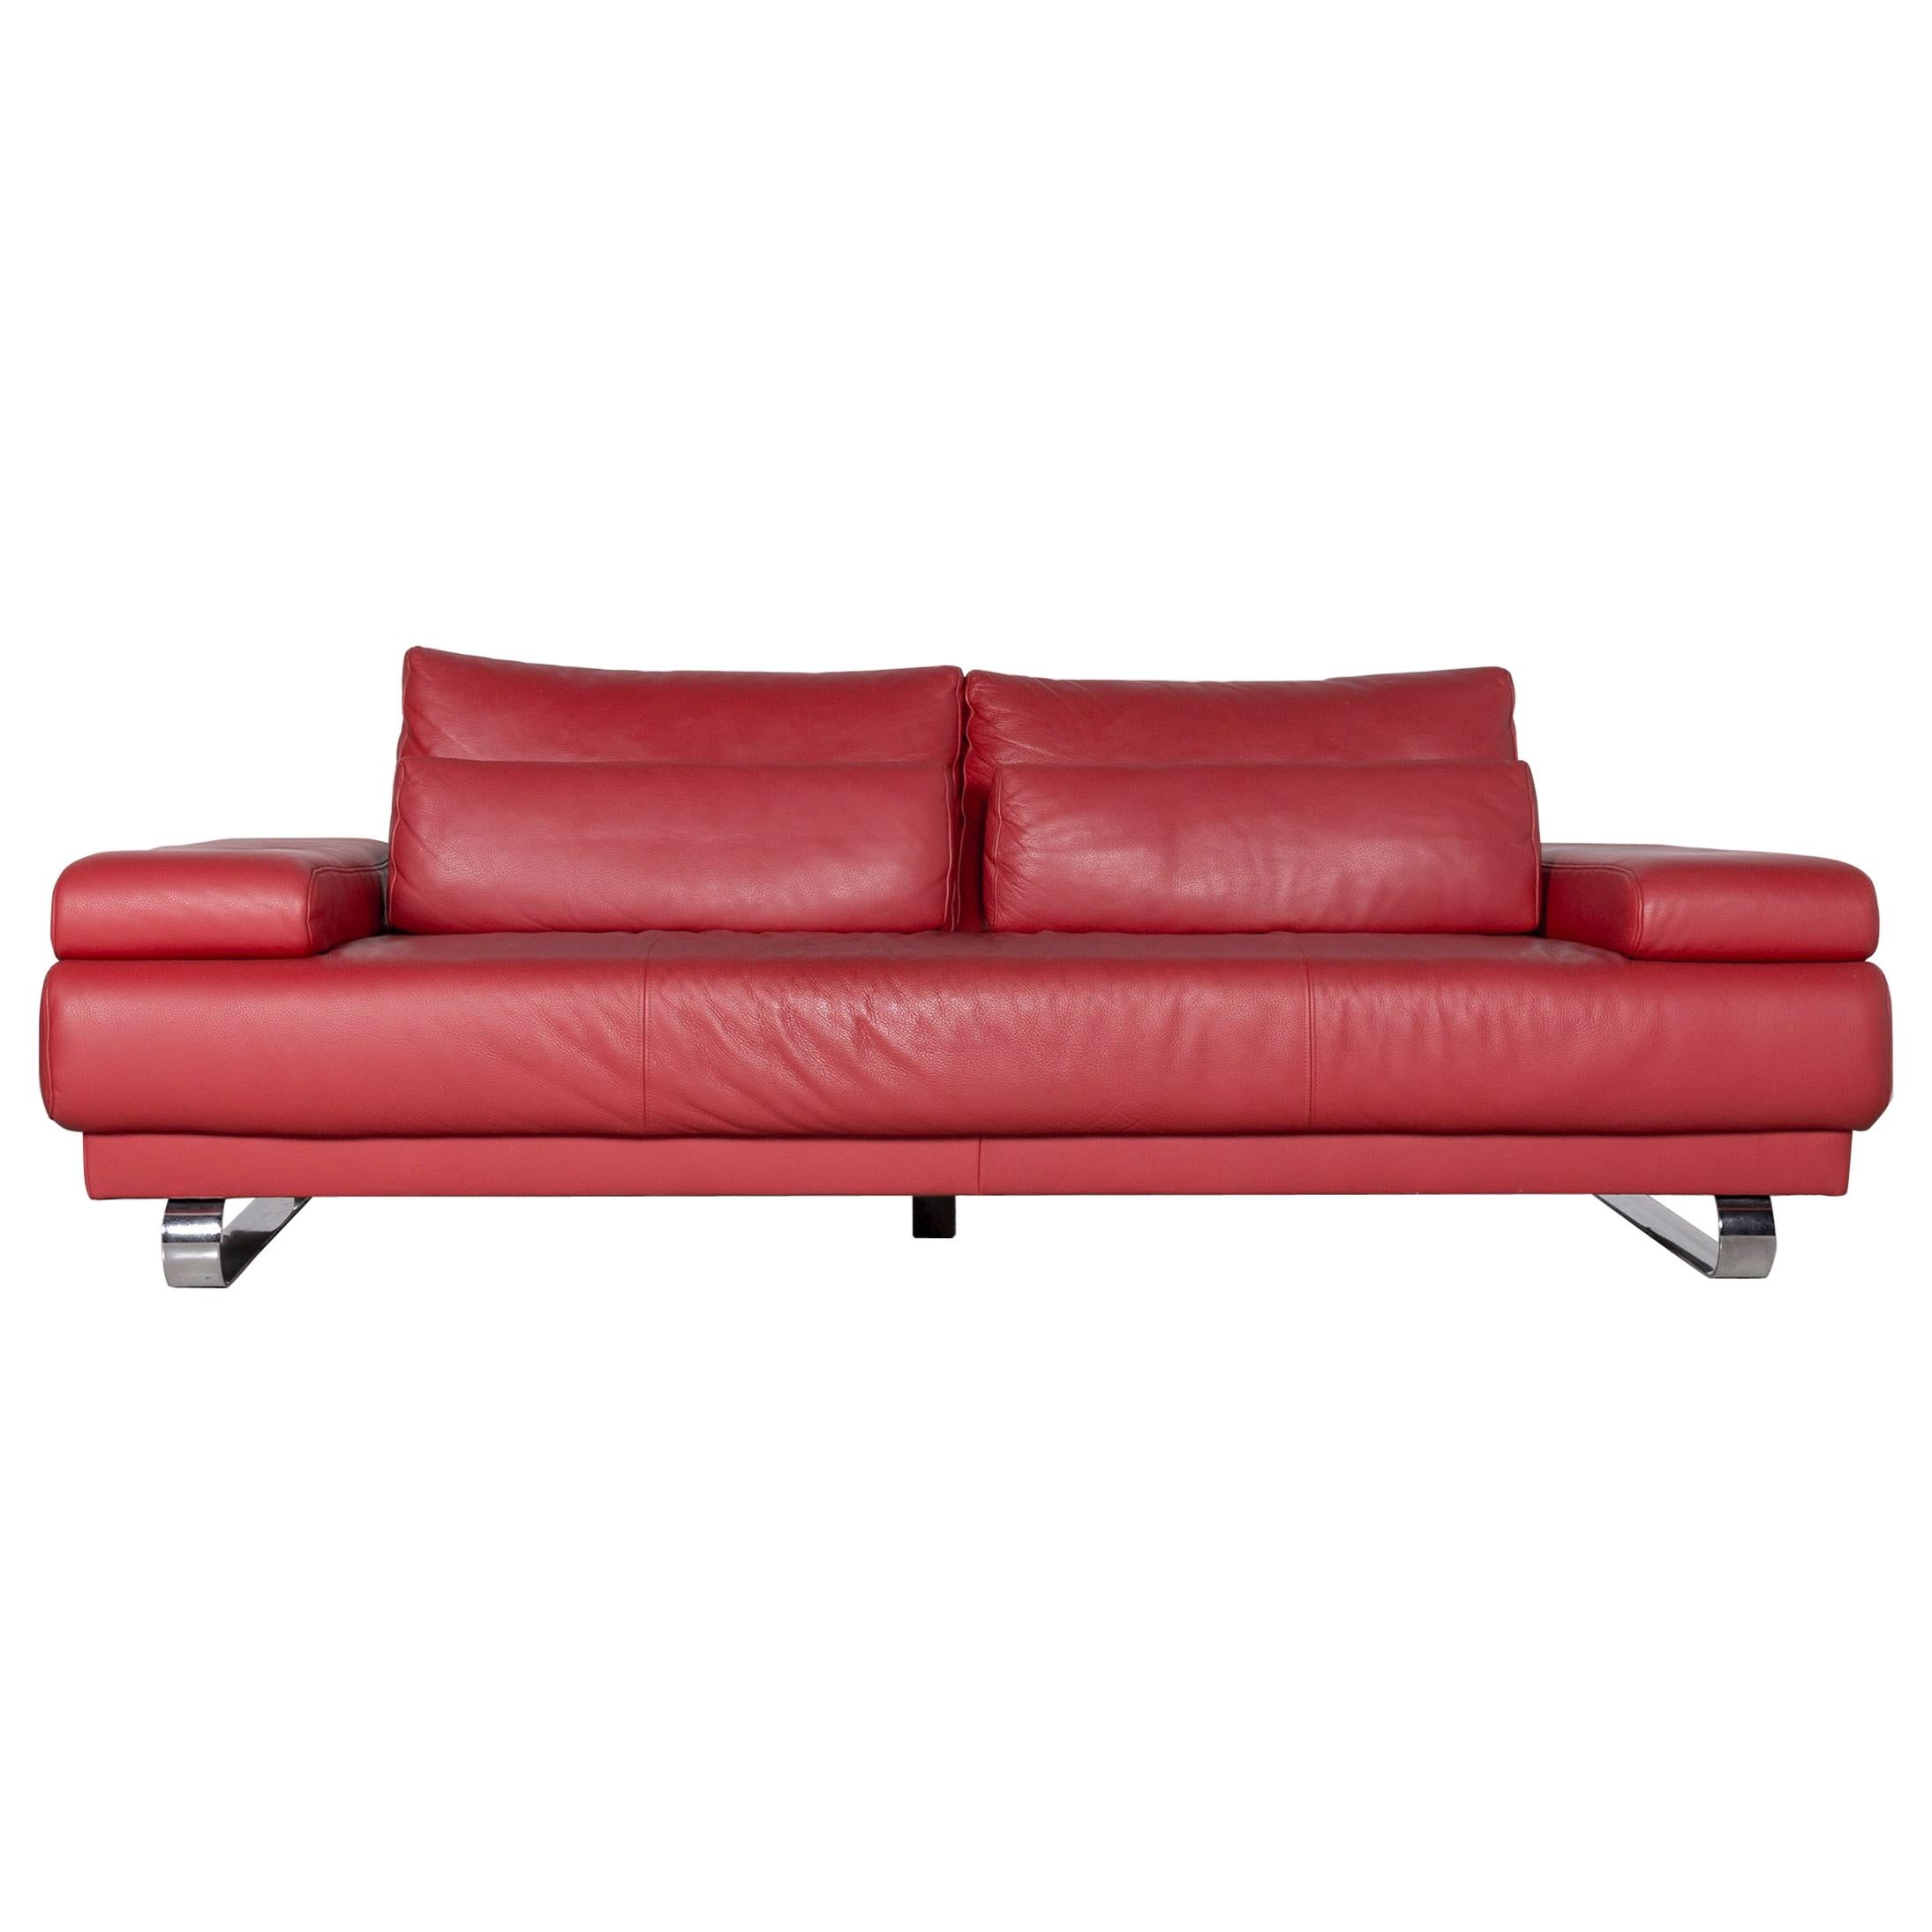 Ewald Schillig Harry Designer Sofa Leather Red Three-Seat Couch For Sale